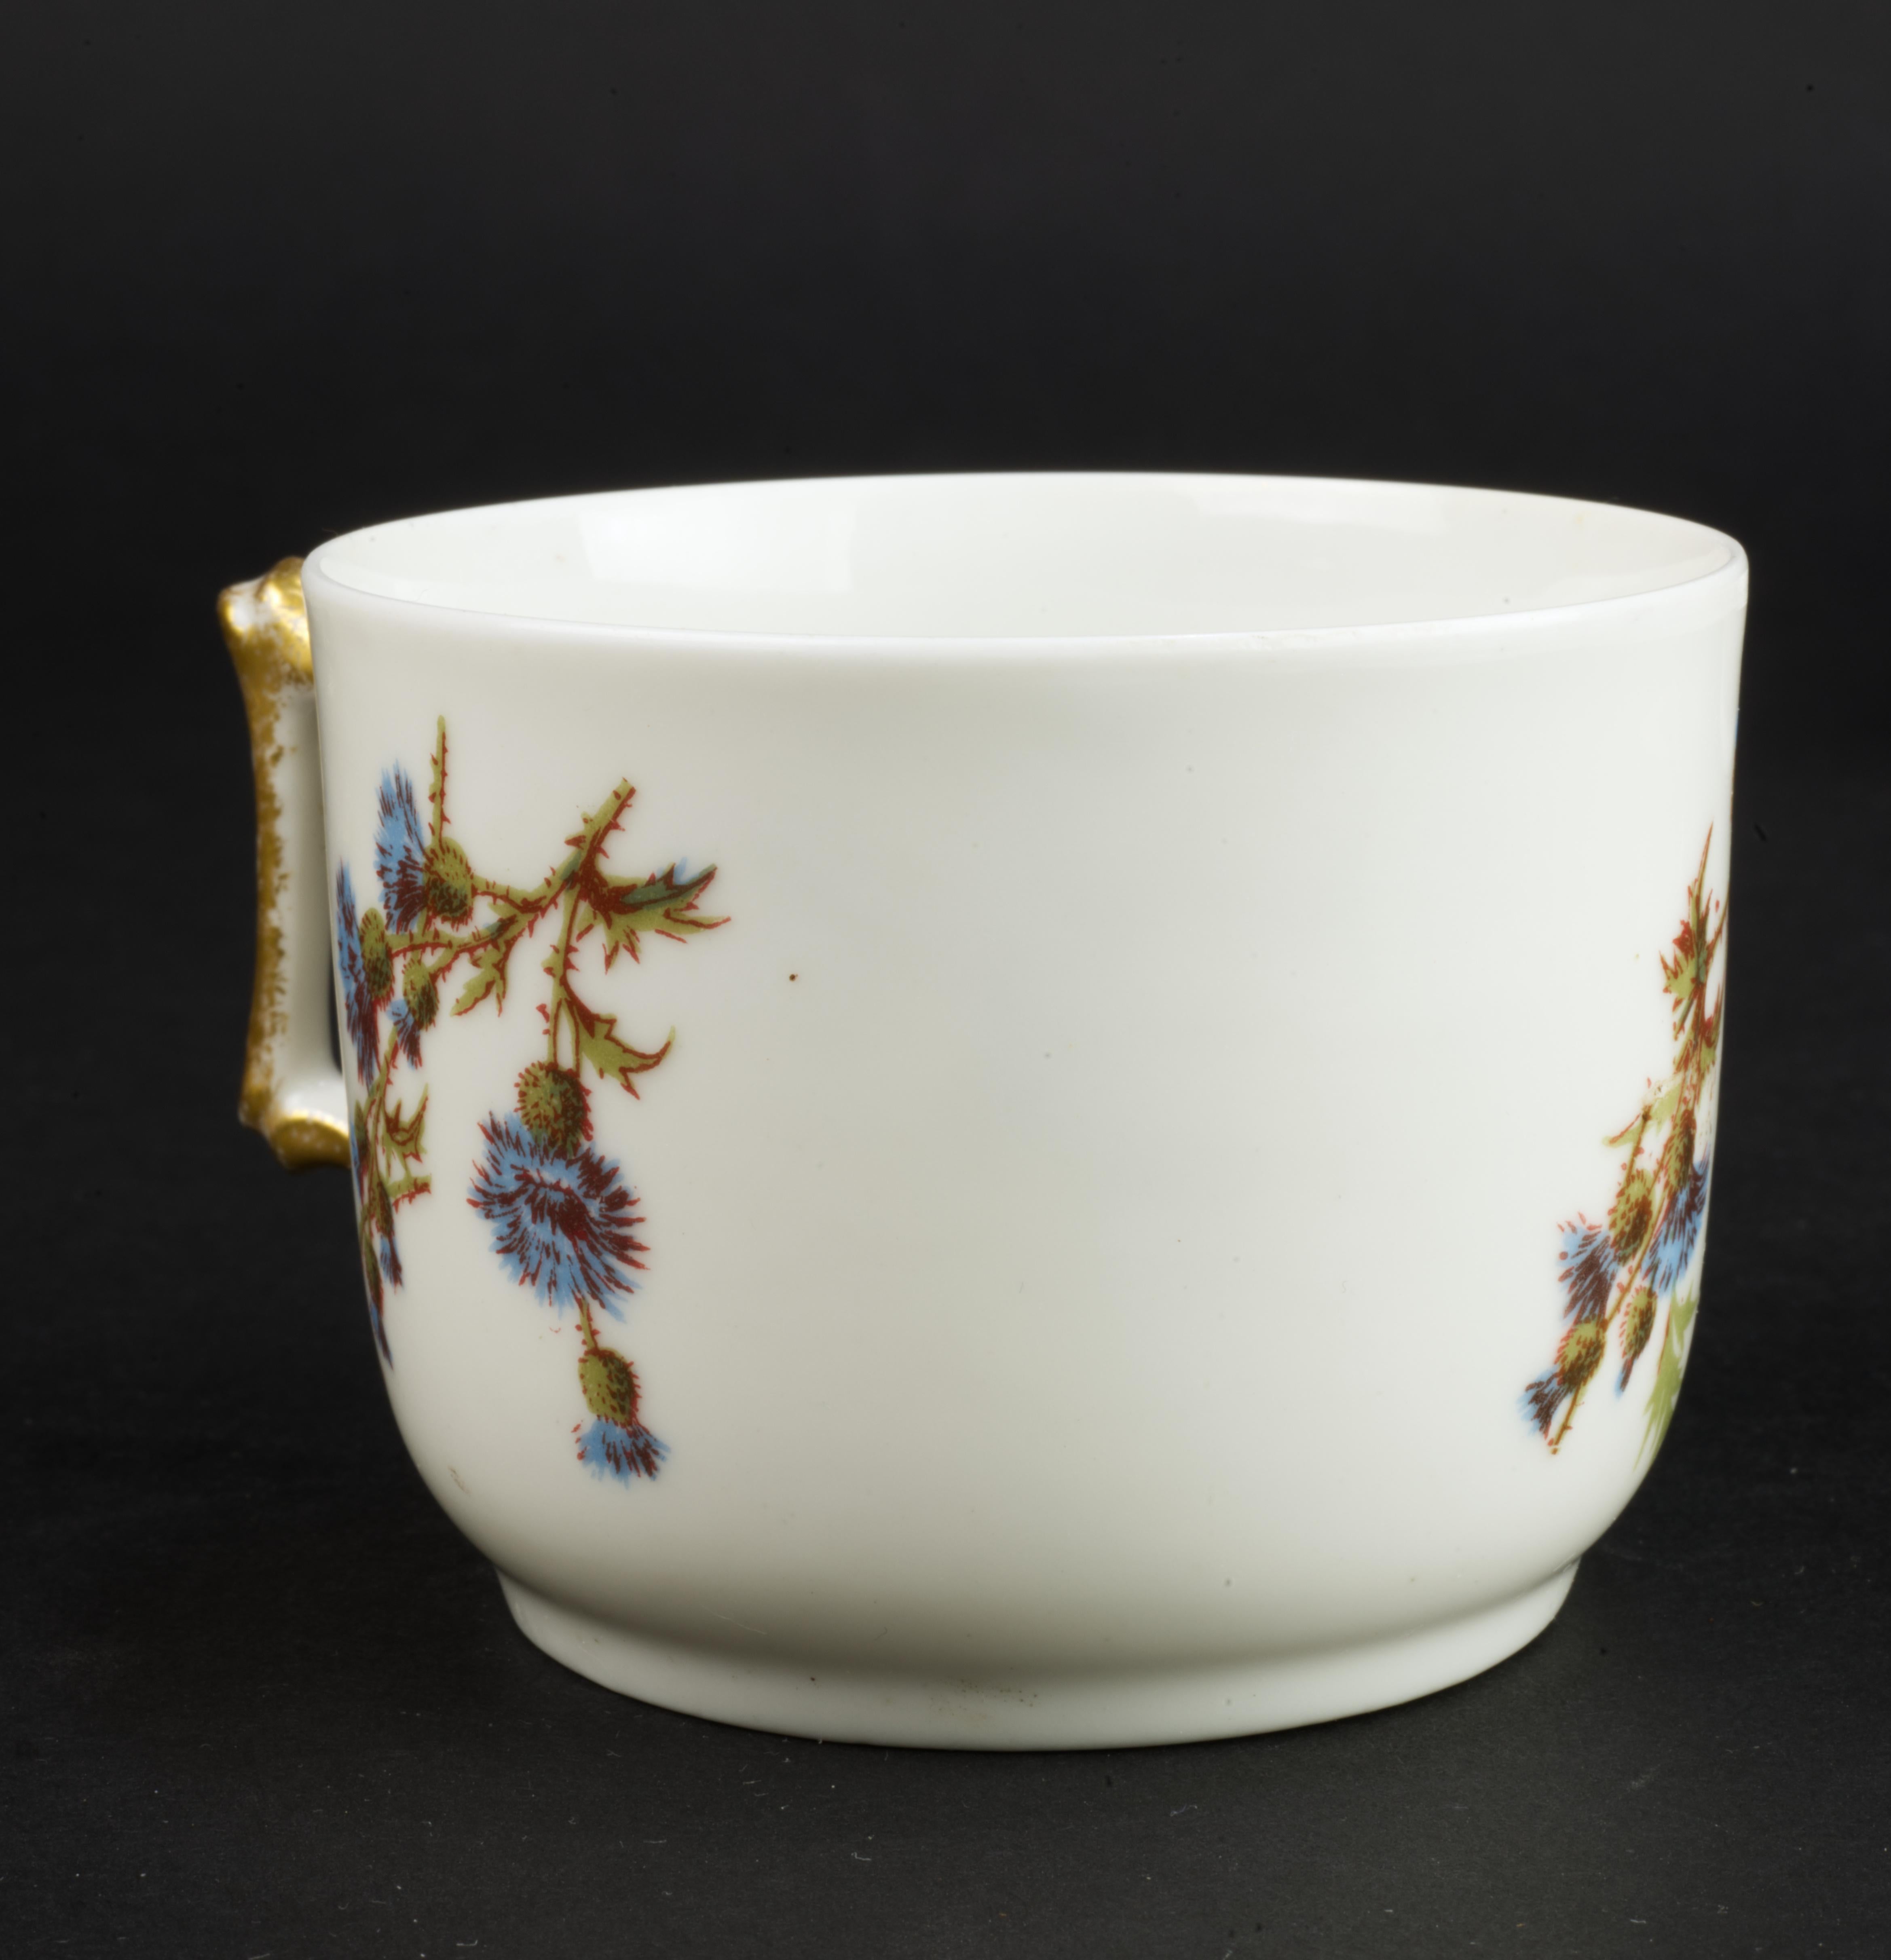 Guerin &Co Limoges France Set of 3 Cups and Saucers Bone China, 1891-1900 For Sale 2